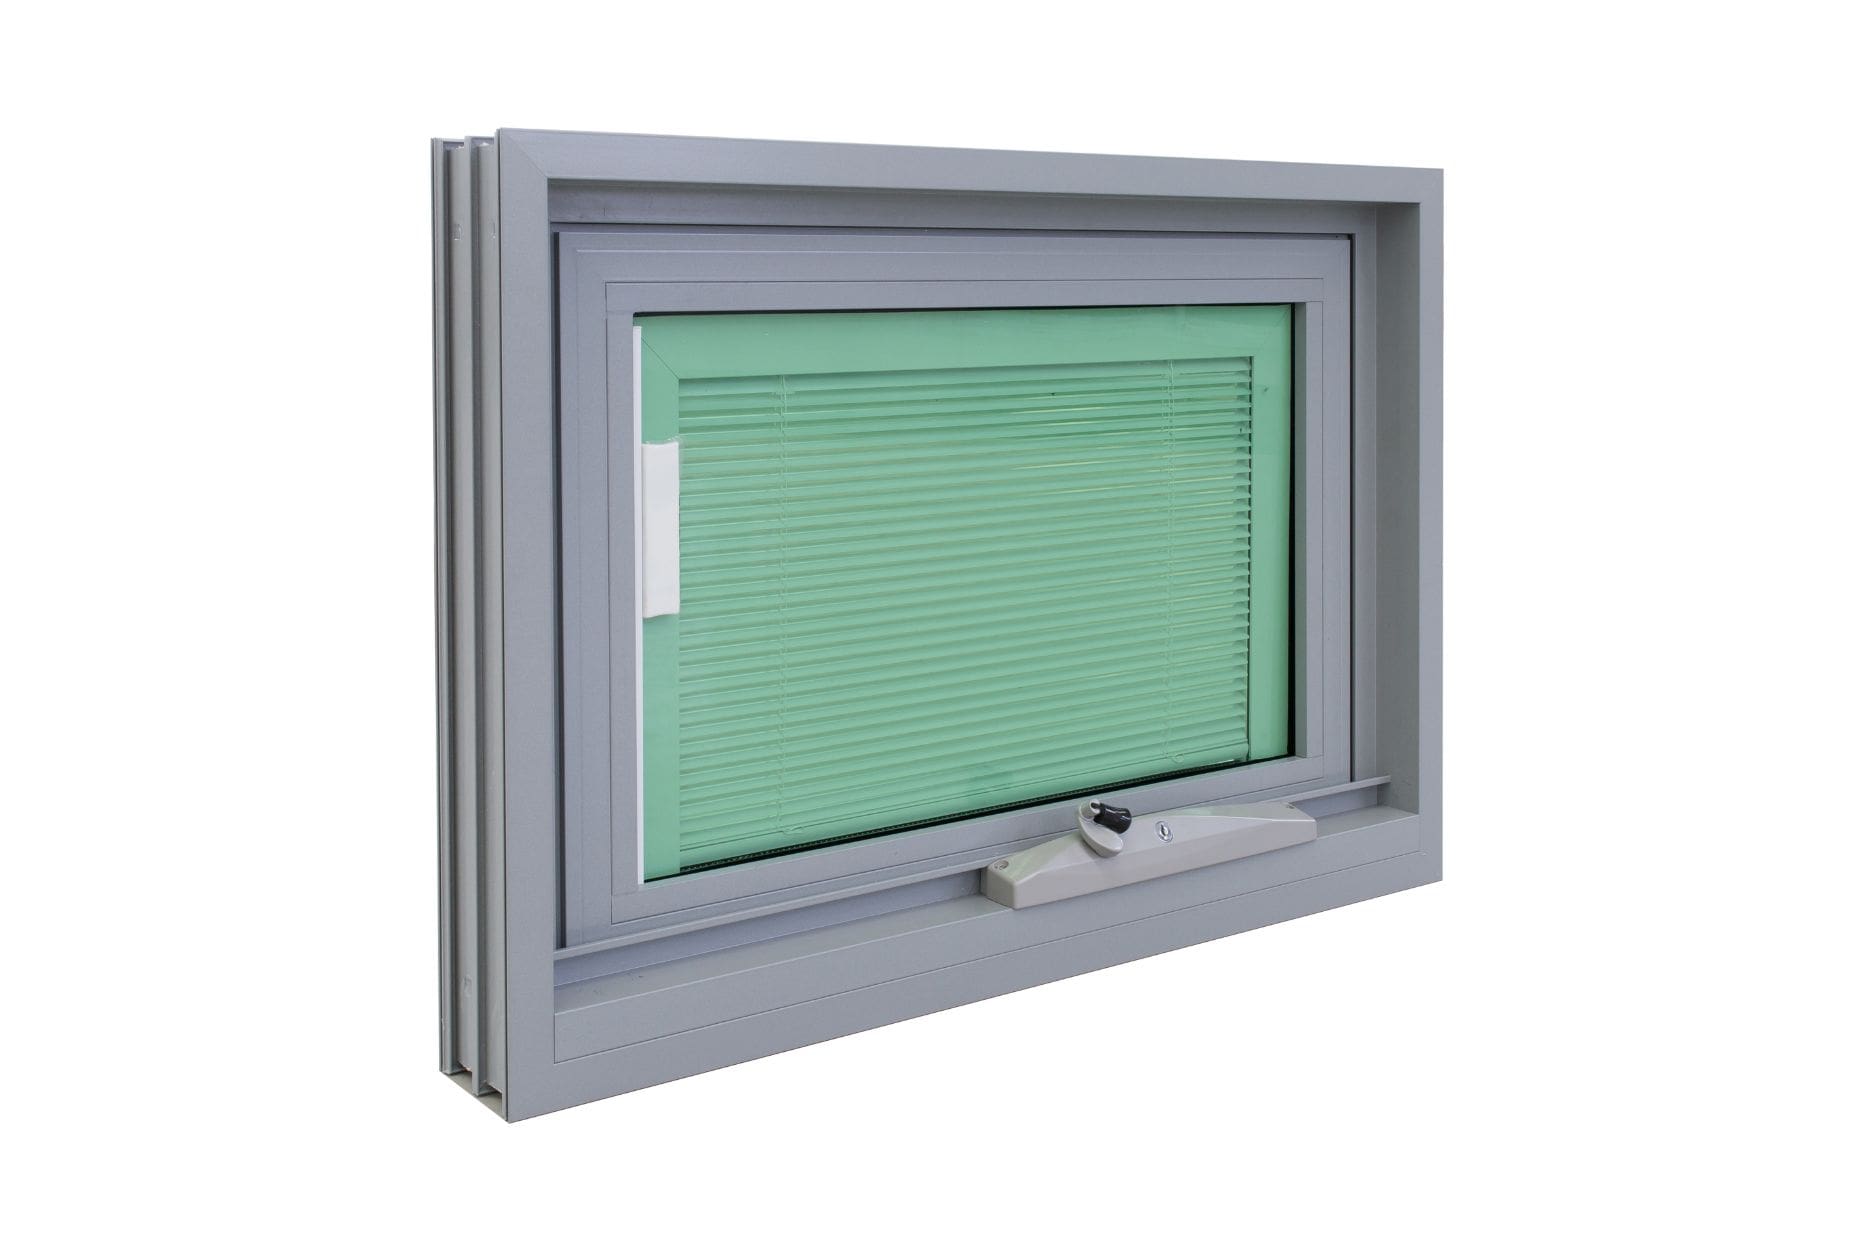 Closed awning window on a plain white wall